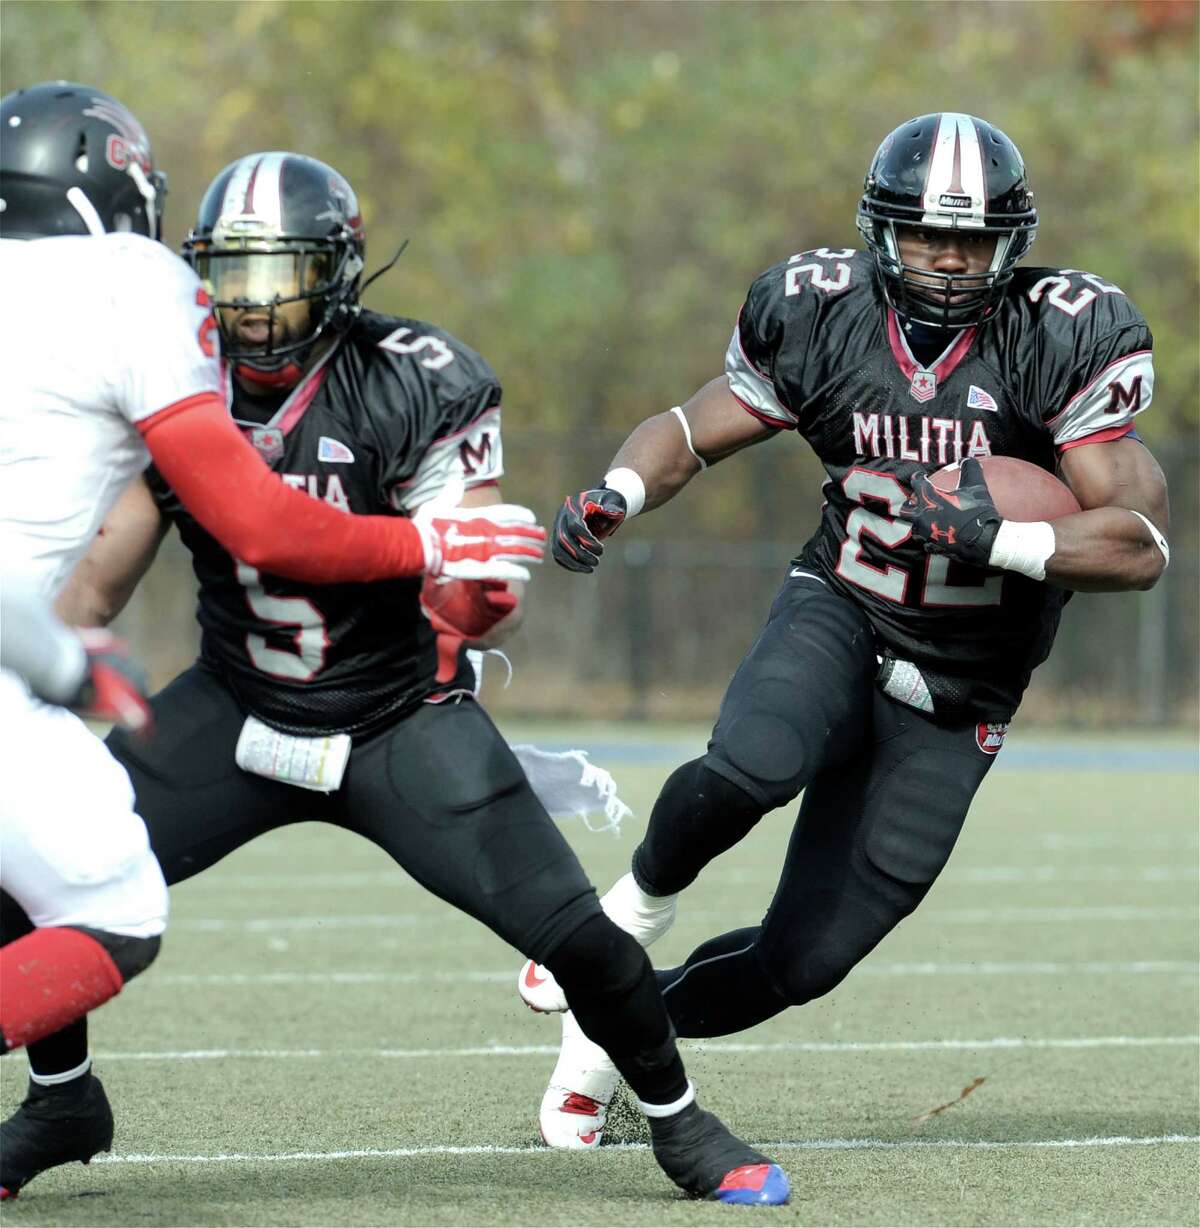 The Militia's Lionel Assie (22) cuts off a block by team mate Jason Davis (5) on Panthers Courtney Sutherland (2) during the New England Football League AAA semifinals between the Western Connecticut Militia and the Connecticut Panthers, on Sunday, November 2, 2014, at Waterbury Municipal Stadium, Waterbury, Conn.